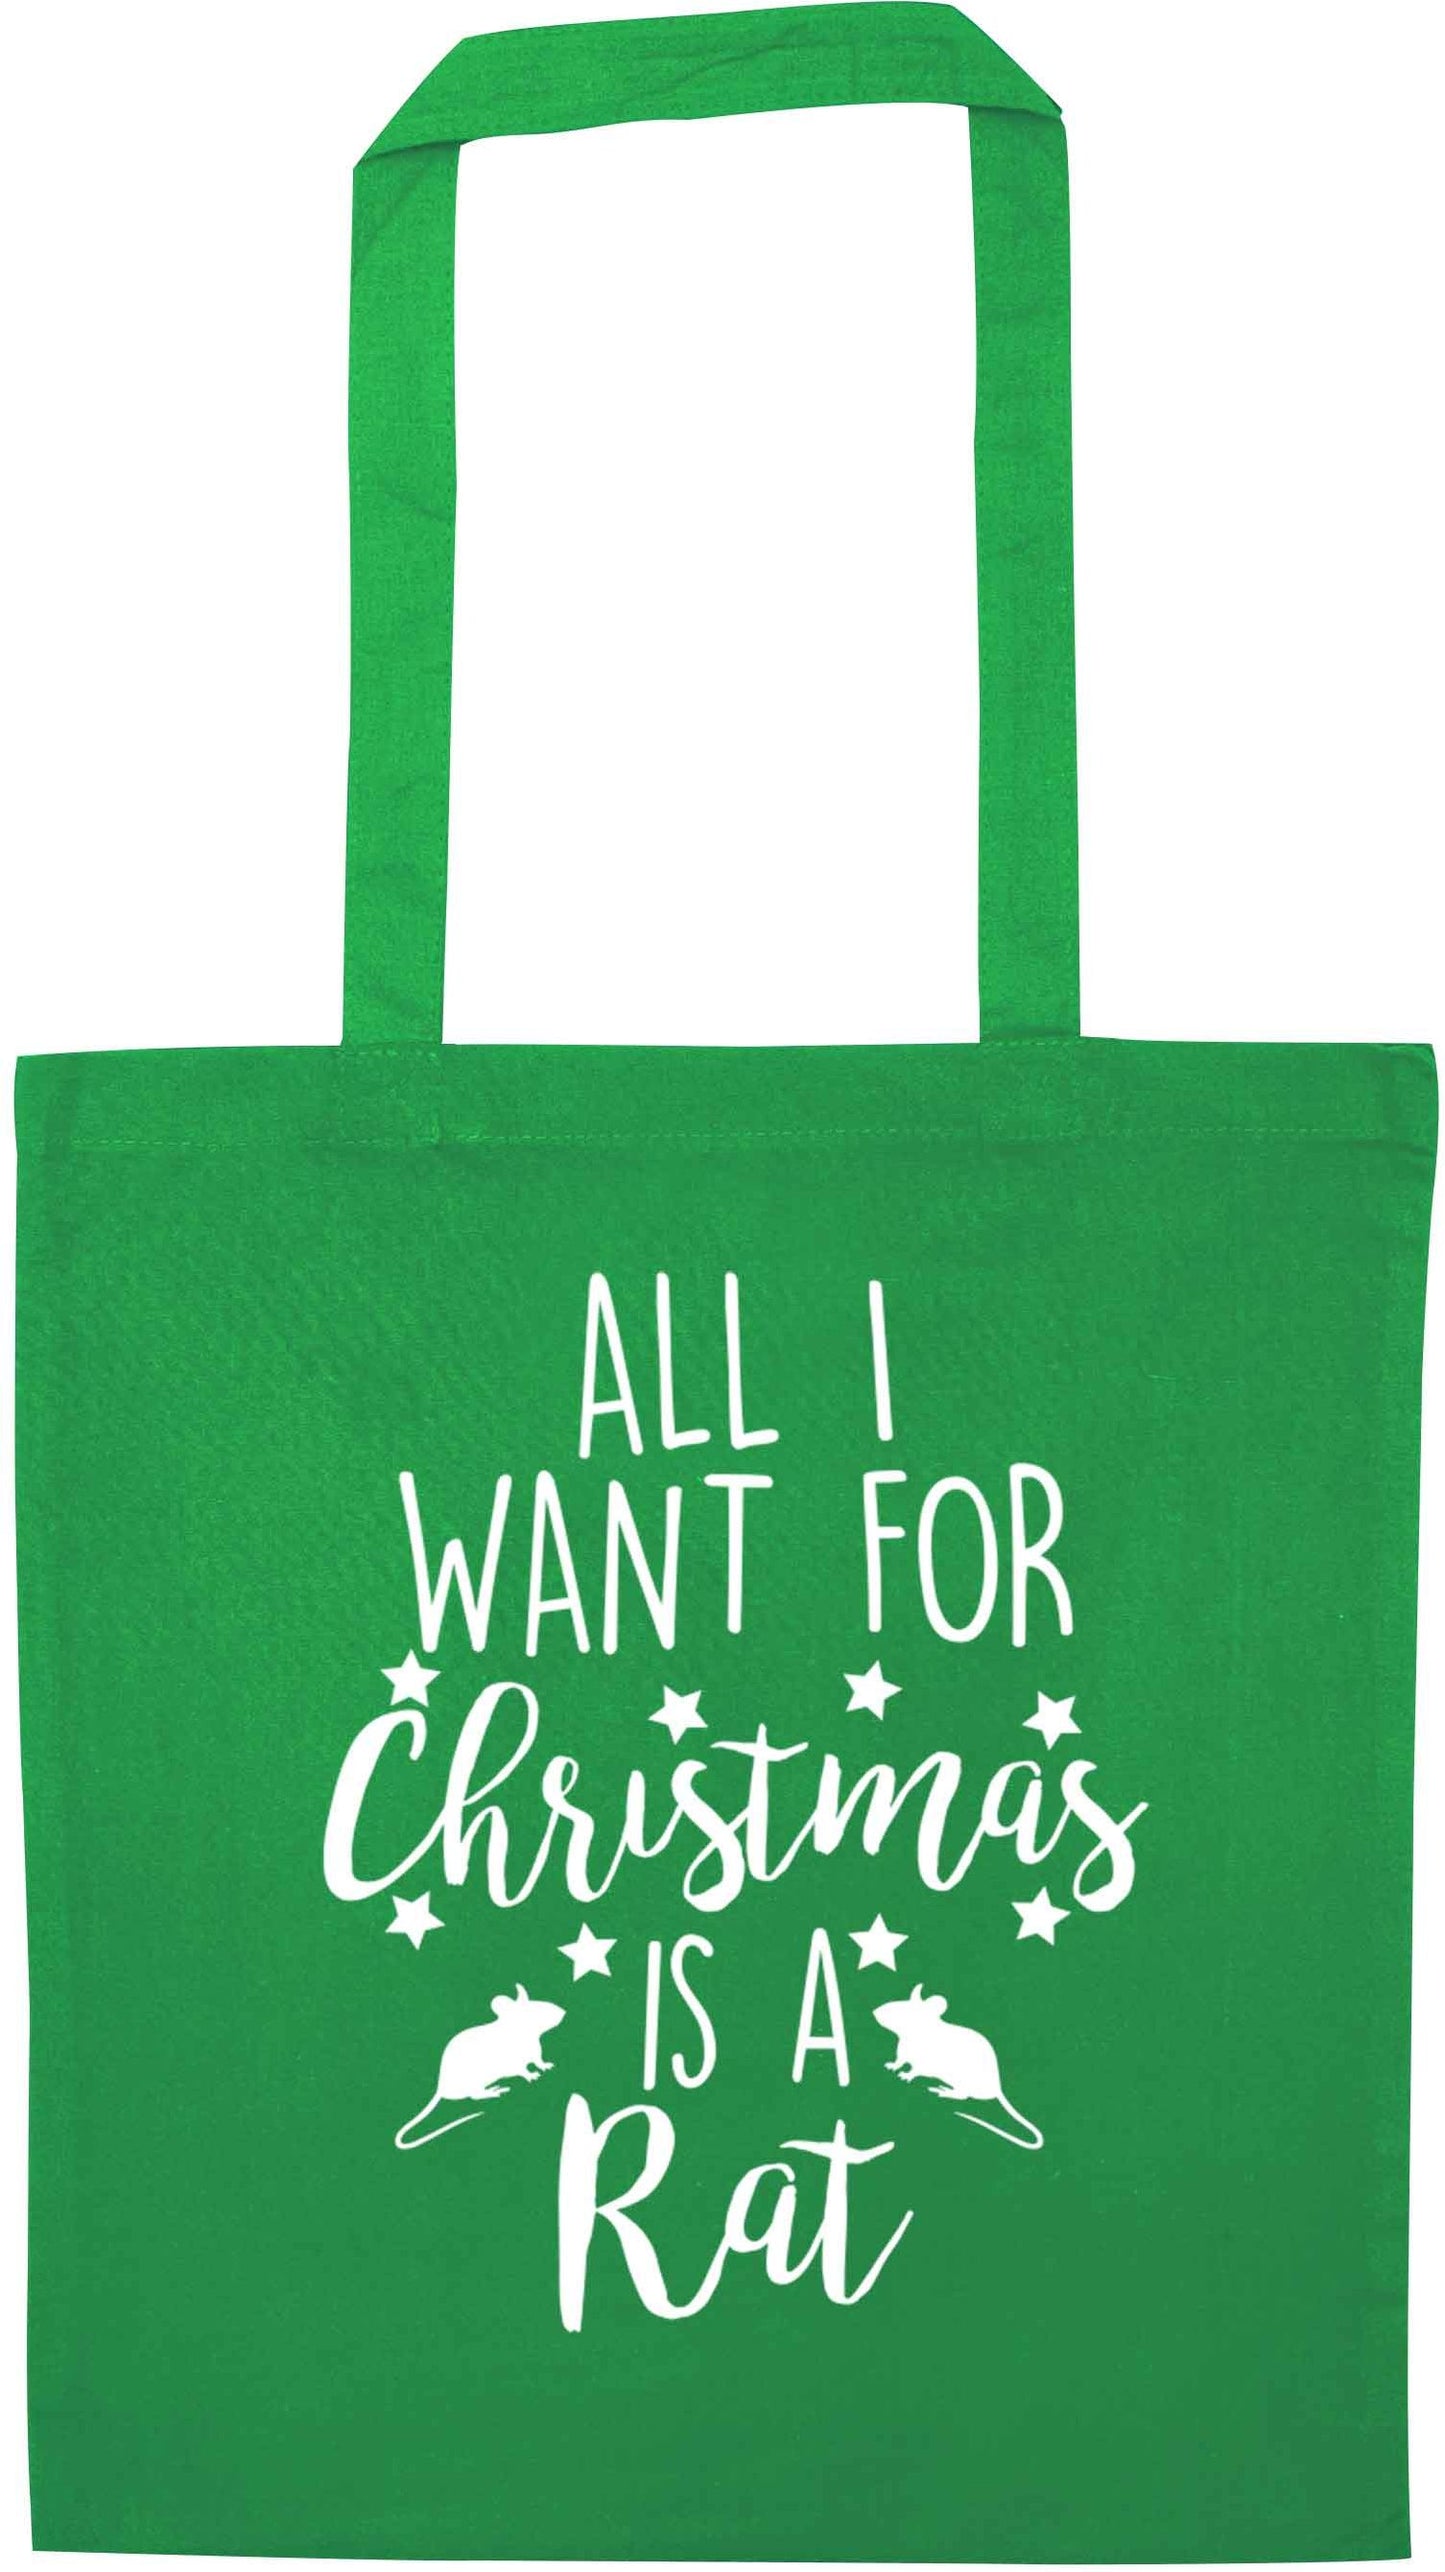 All I want for Christmas is a rat green tote bag